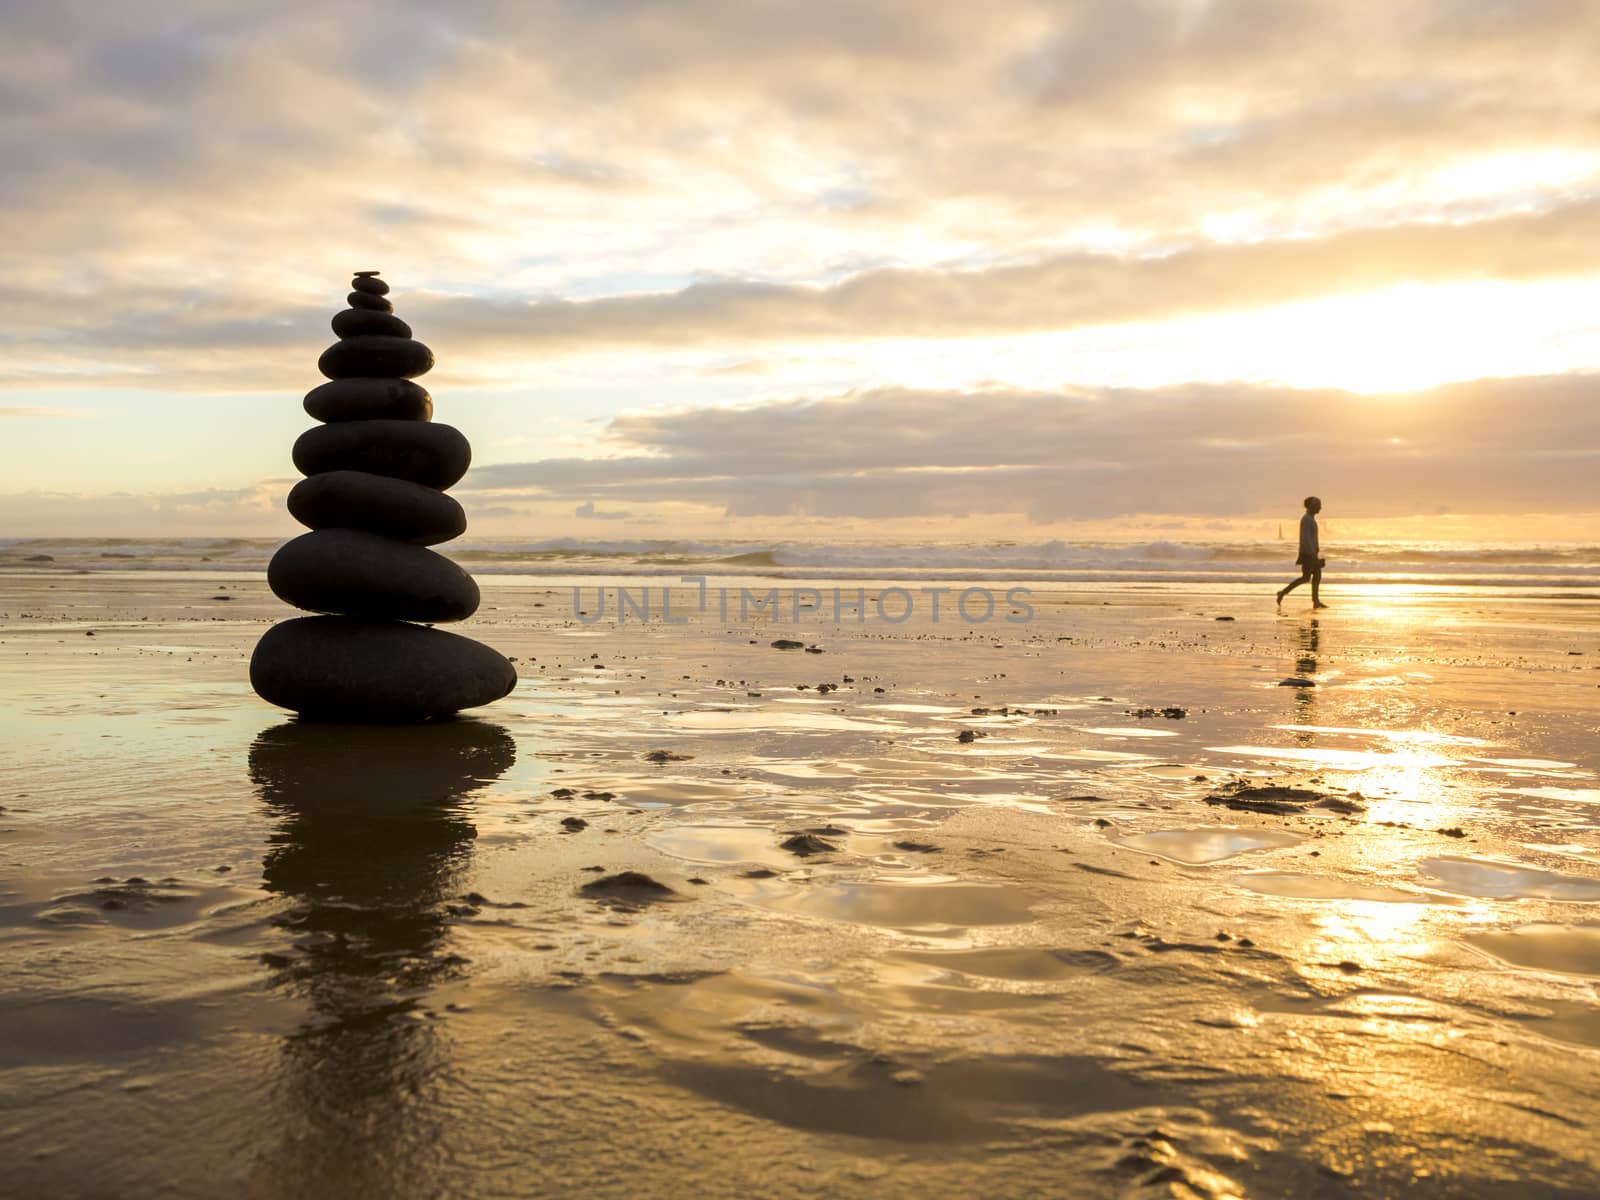 Sea stones stacked on the beach